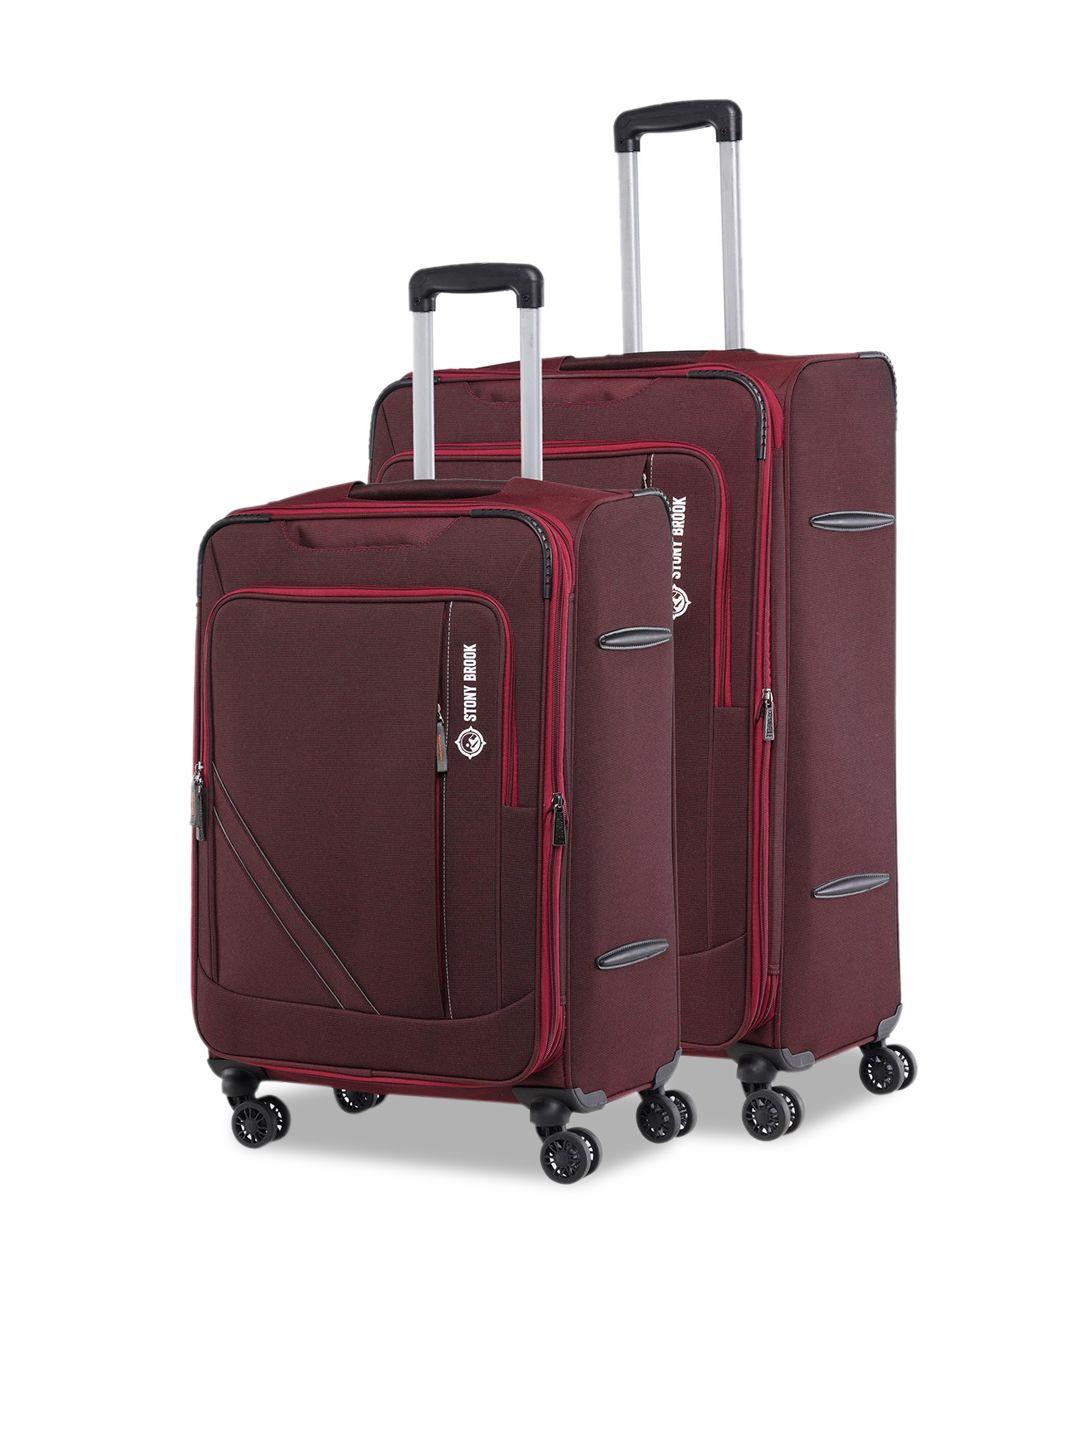 stony brook by nasher miles set of 2 360-degree rotation soft-sided trolley bags